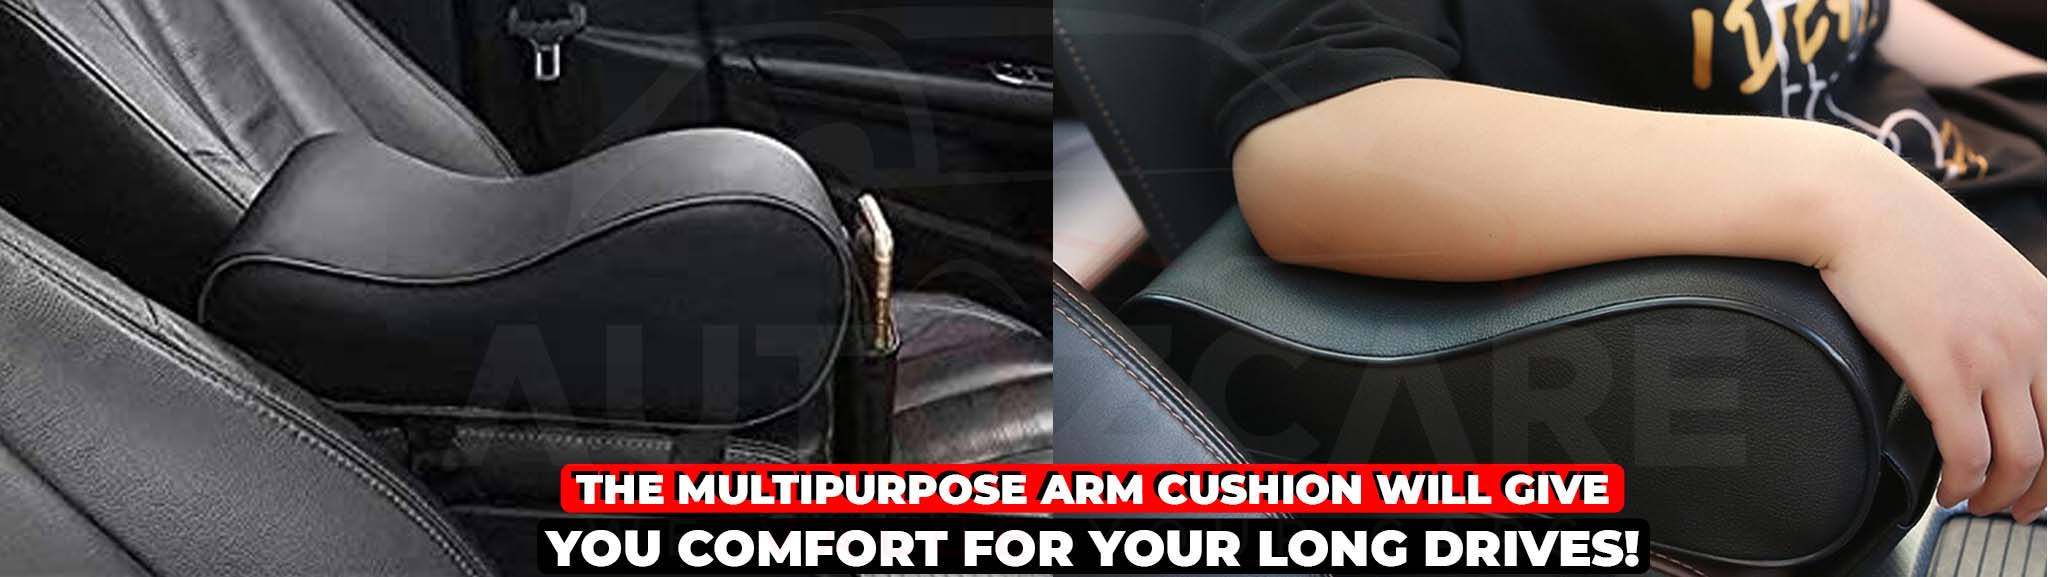 The multipurpose arm cushion will give you comfort for your long drives!